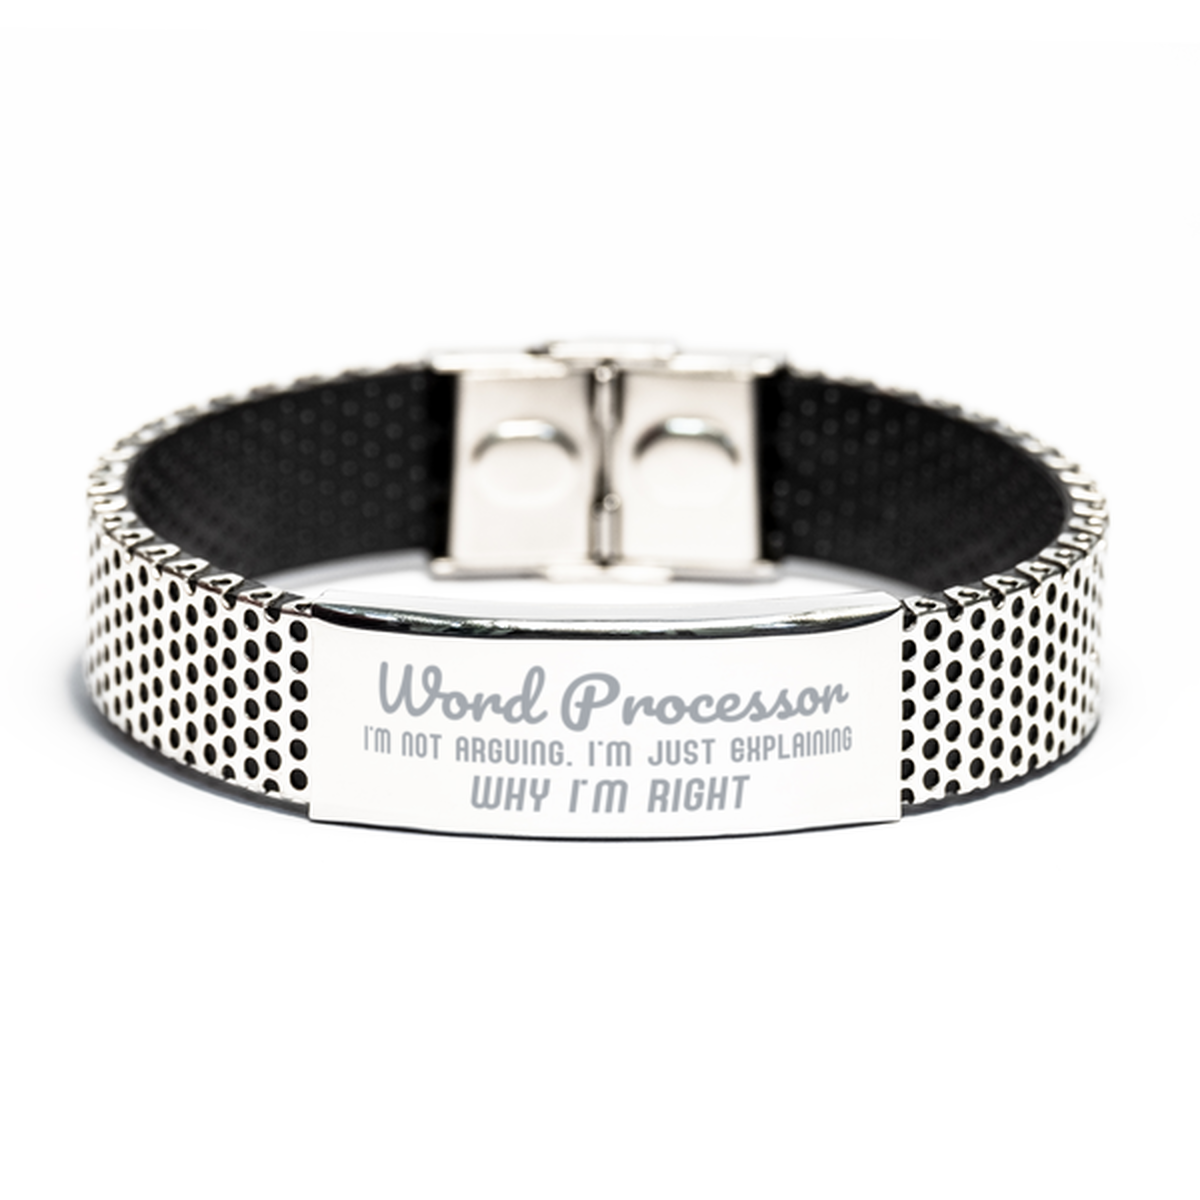 Word Processor I'm not Arguing. I'm Just Explaining Why I'm RIGHT Stainless Steel Bracelet, Funny Saying Quote Word Processor Gifts For Word Processor Graduation Birthday Christmas Gifts for Men Women Coworker